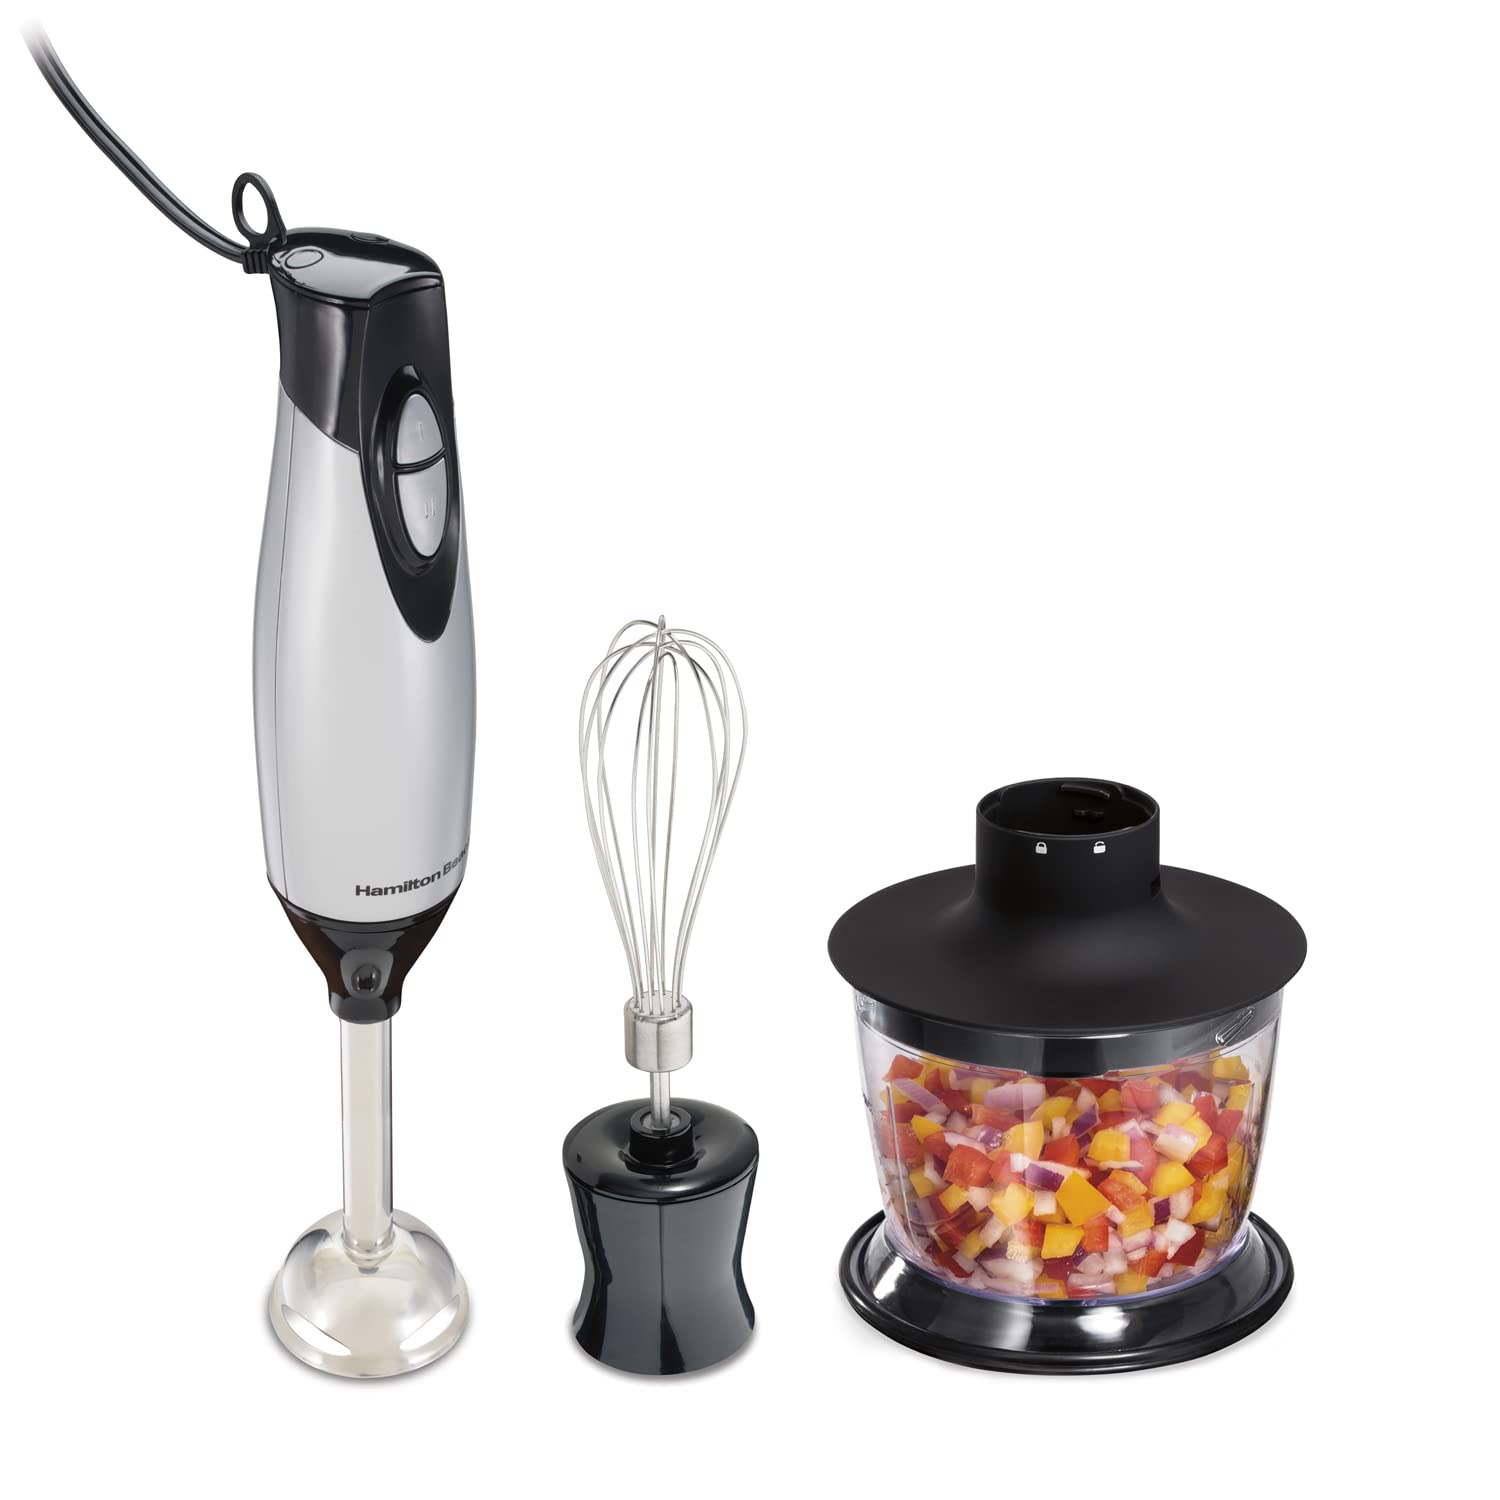 Can a Hand Blender Be Used As a Food Processor